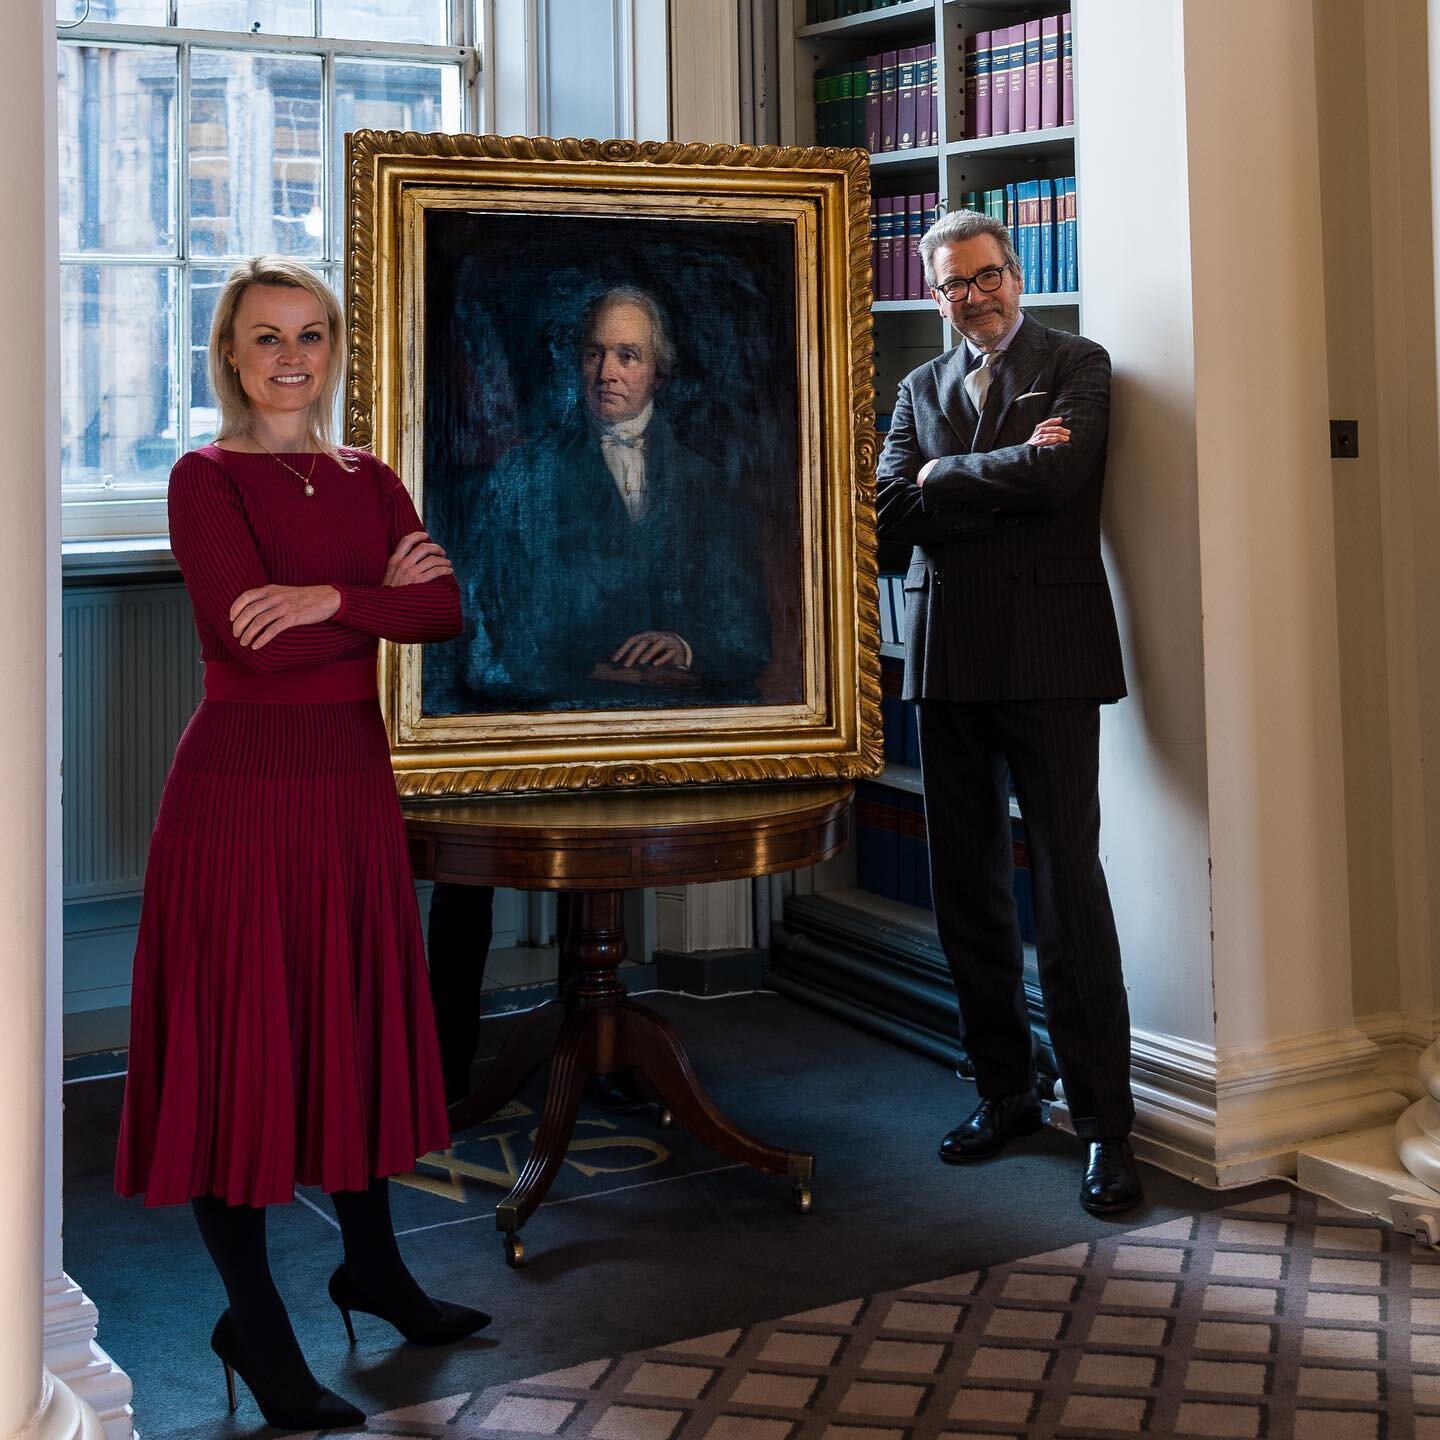 This fine portrait in oils of Christopher Douglas WS (1811 - 1894) was recently generously donated, along with important books and manuscripts, to the WS Society by the Douglas family. The Douglas family are closely associated with Sir Walter Scott a